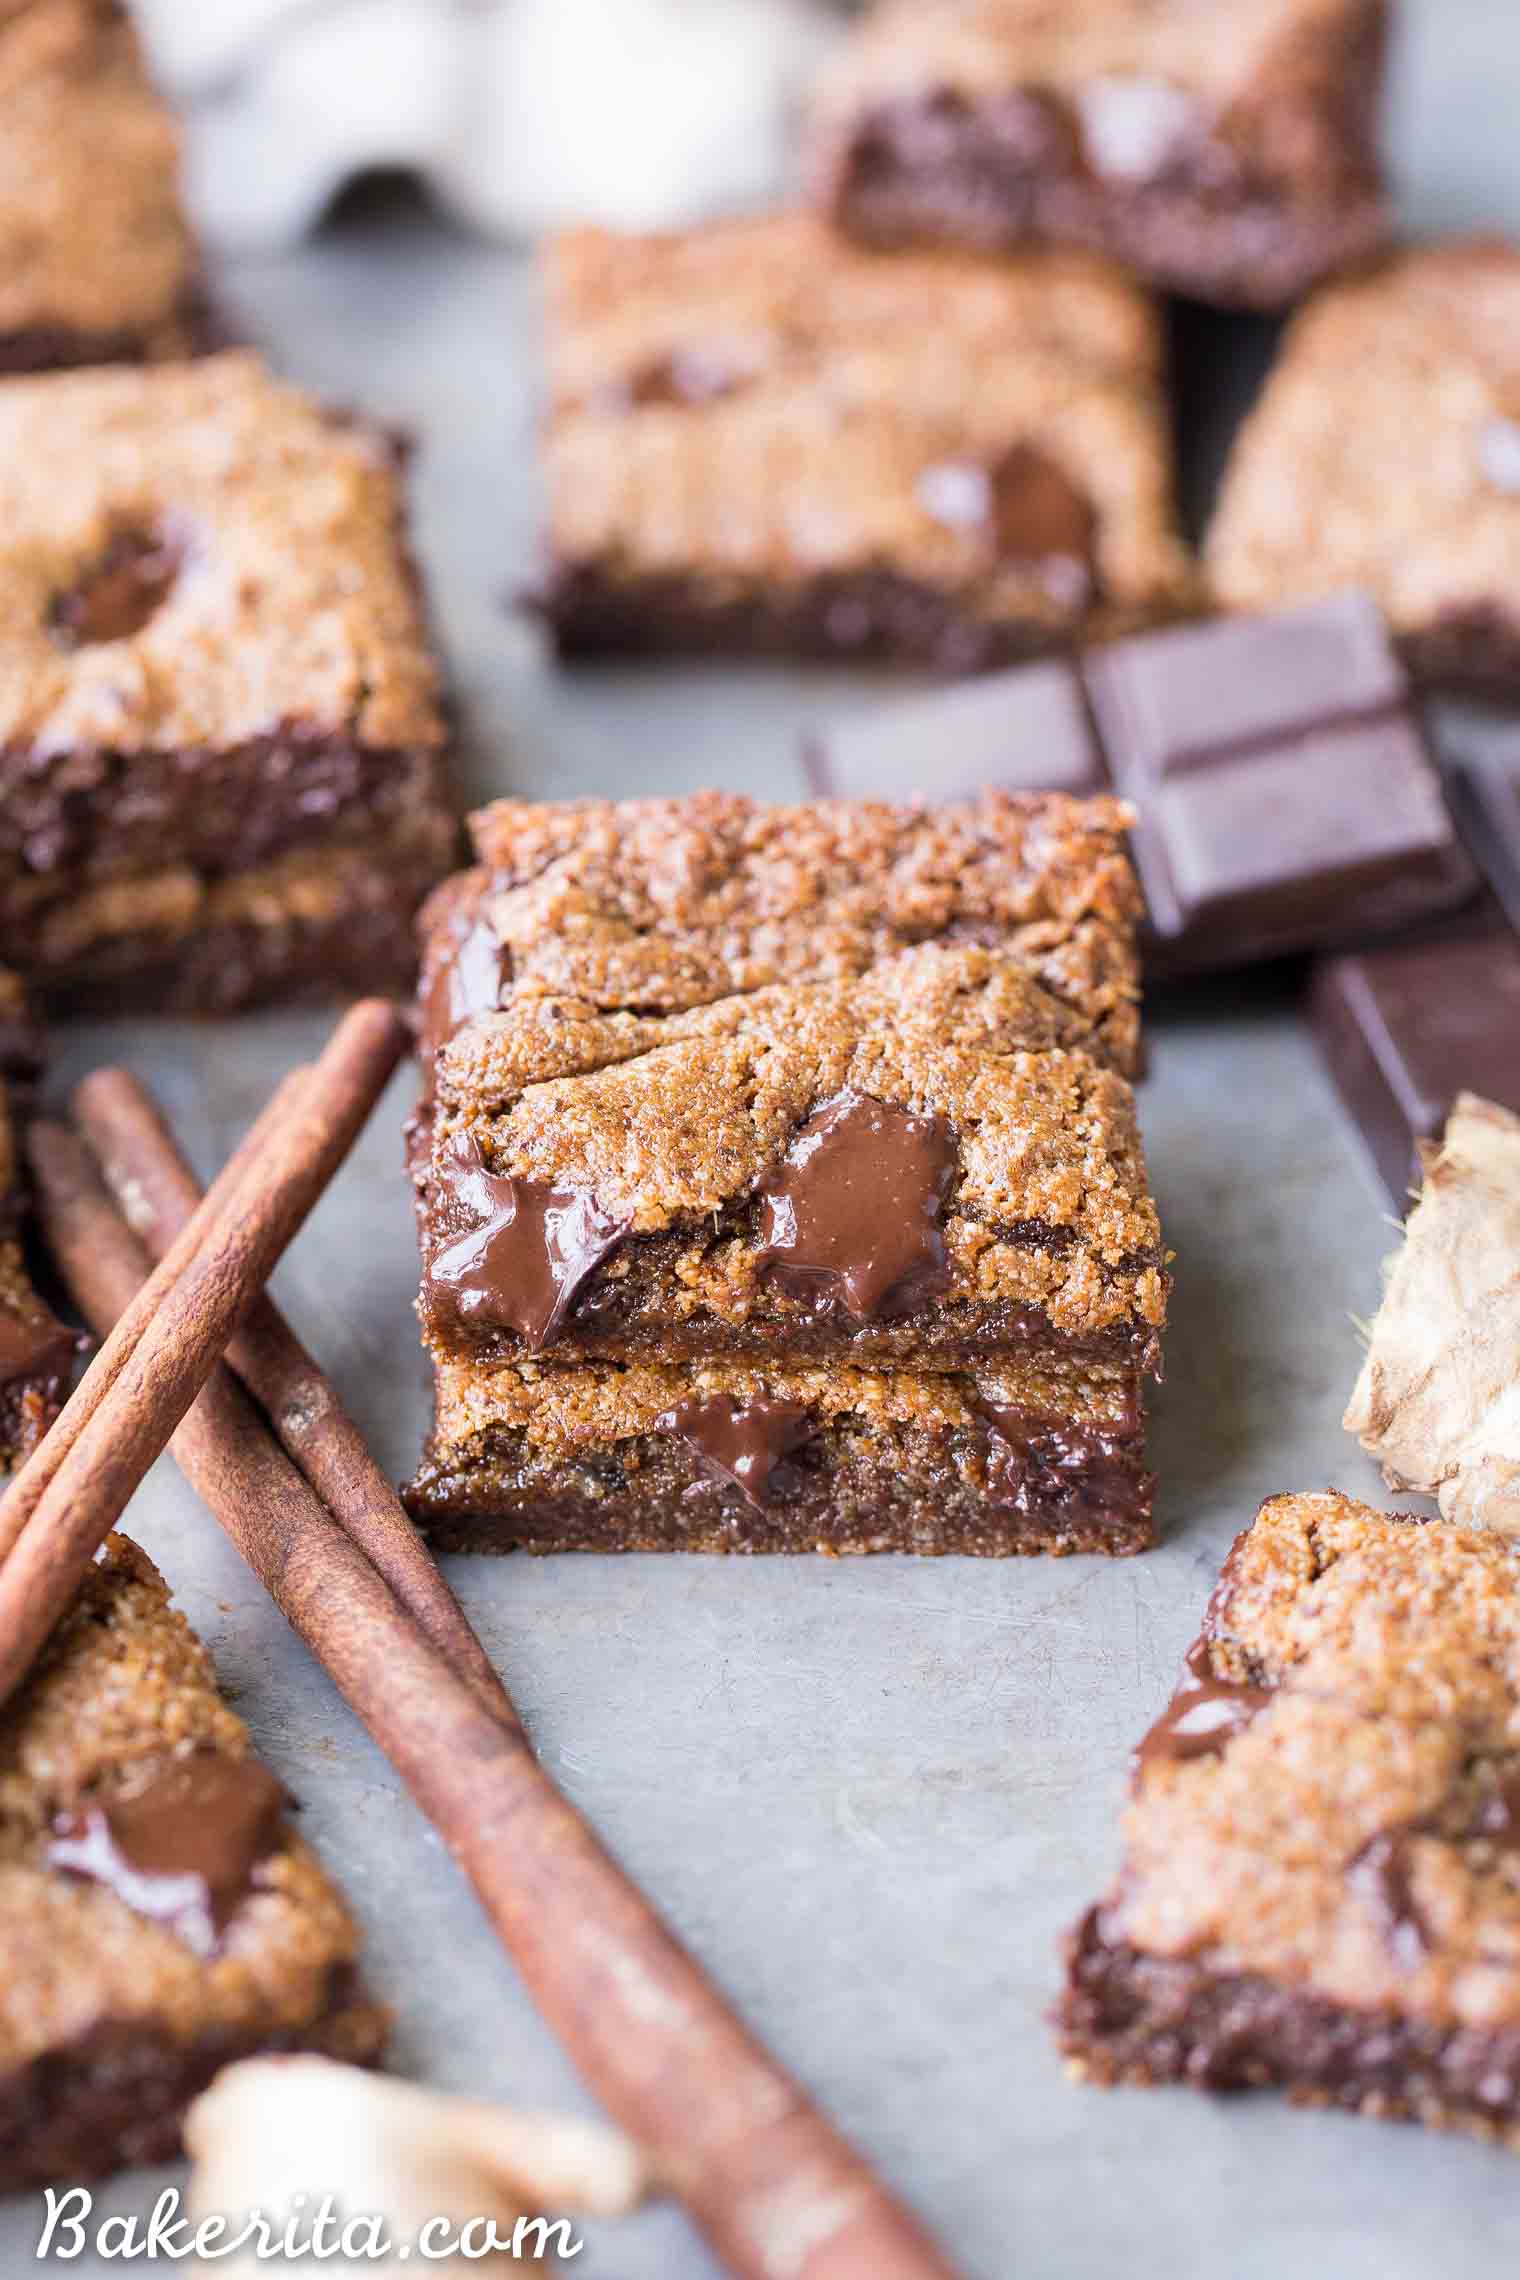 These Chocolate Chunk Gingerbread Blondies are chewy, chocolatey, and full of warm gingerbread spices. You can get the batter ready for these easy, gluten-free, paleo, and vegan blondies in about 10 minutes. They're perfect for the holidays, or any time of year when you're craving a gingerbread treat.